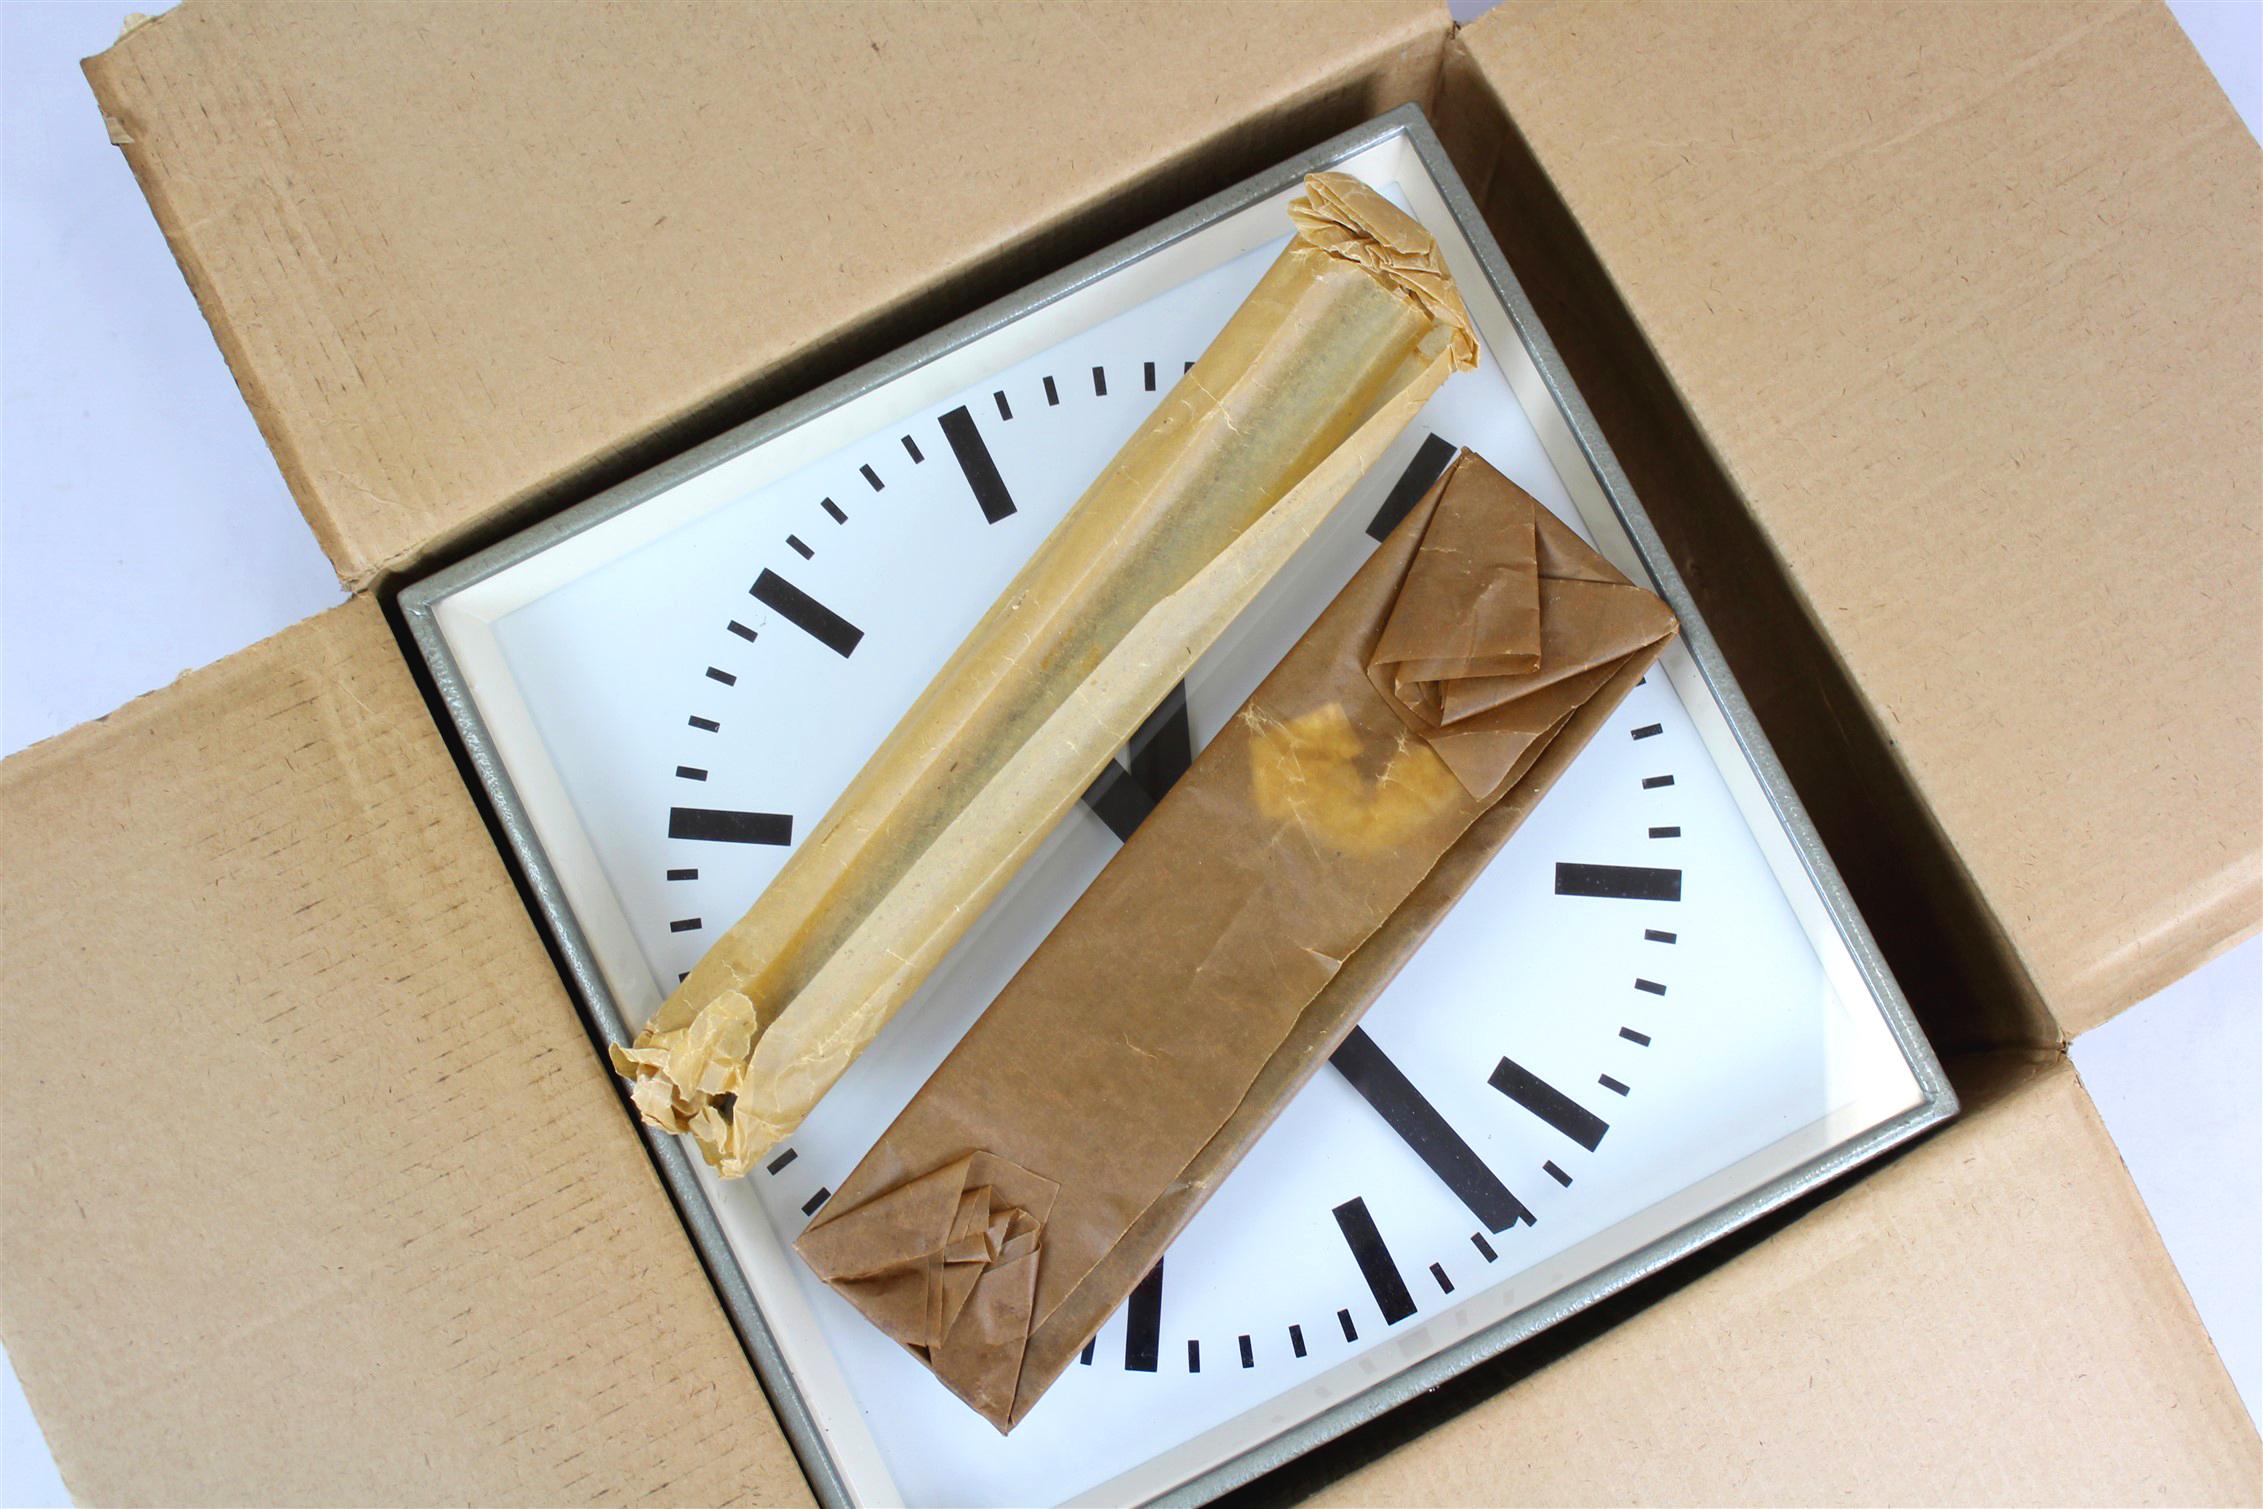 Industrial Large Double-Sided Railway Clock from Pragotron, 1980s (New, in box) For Sale